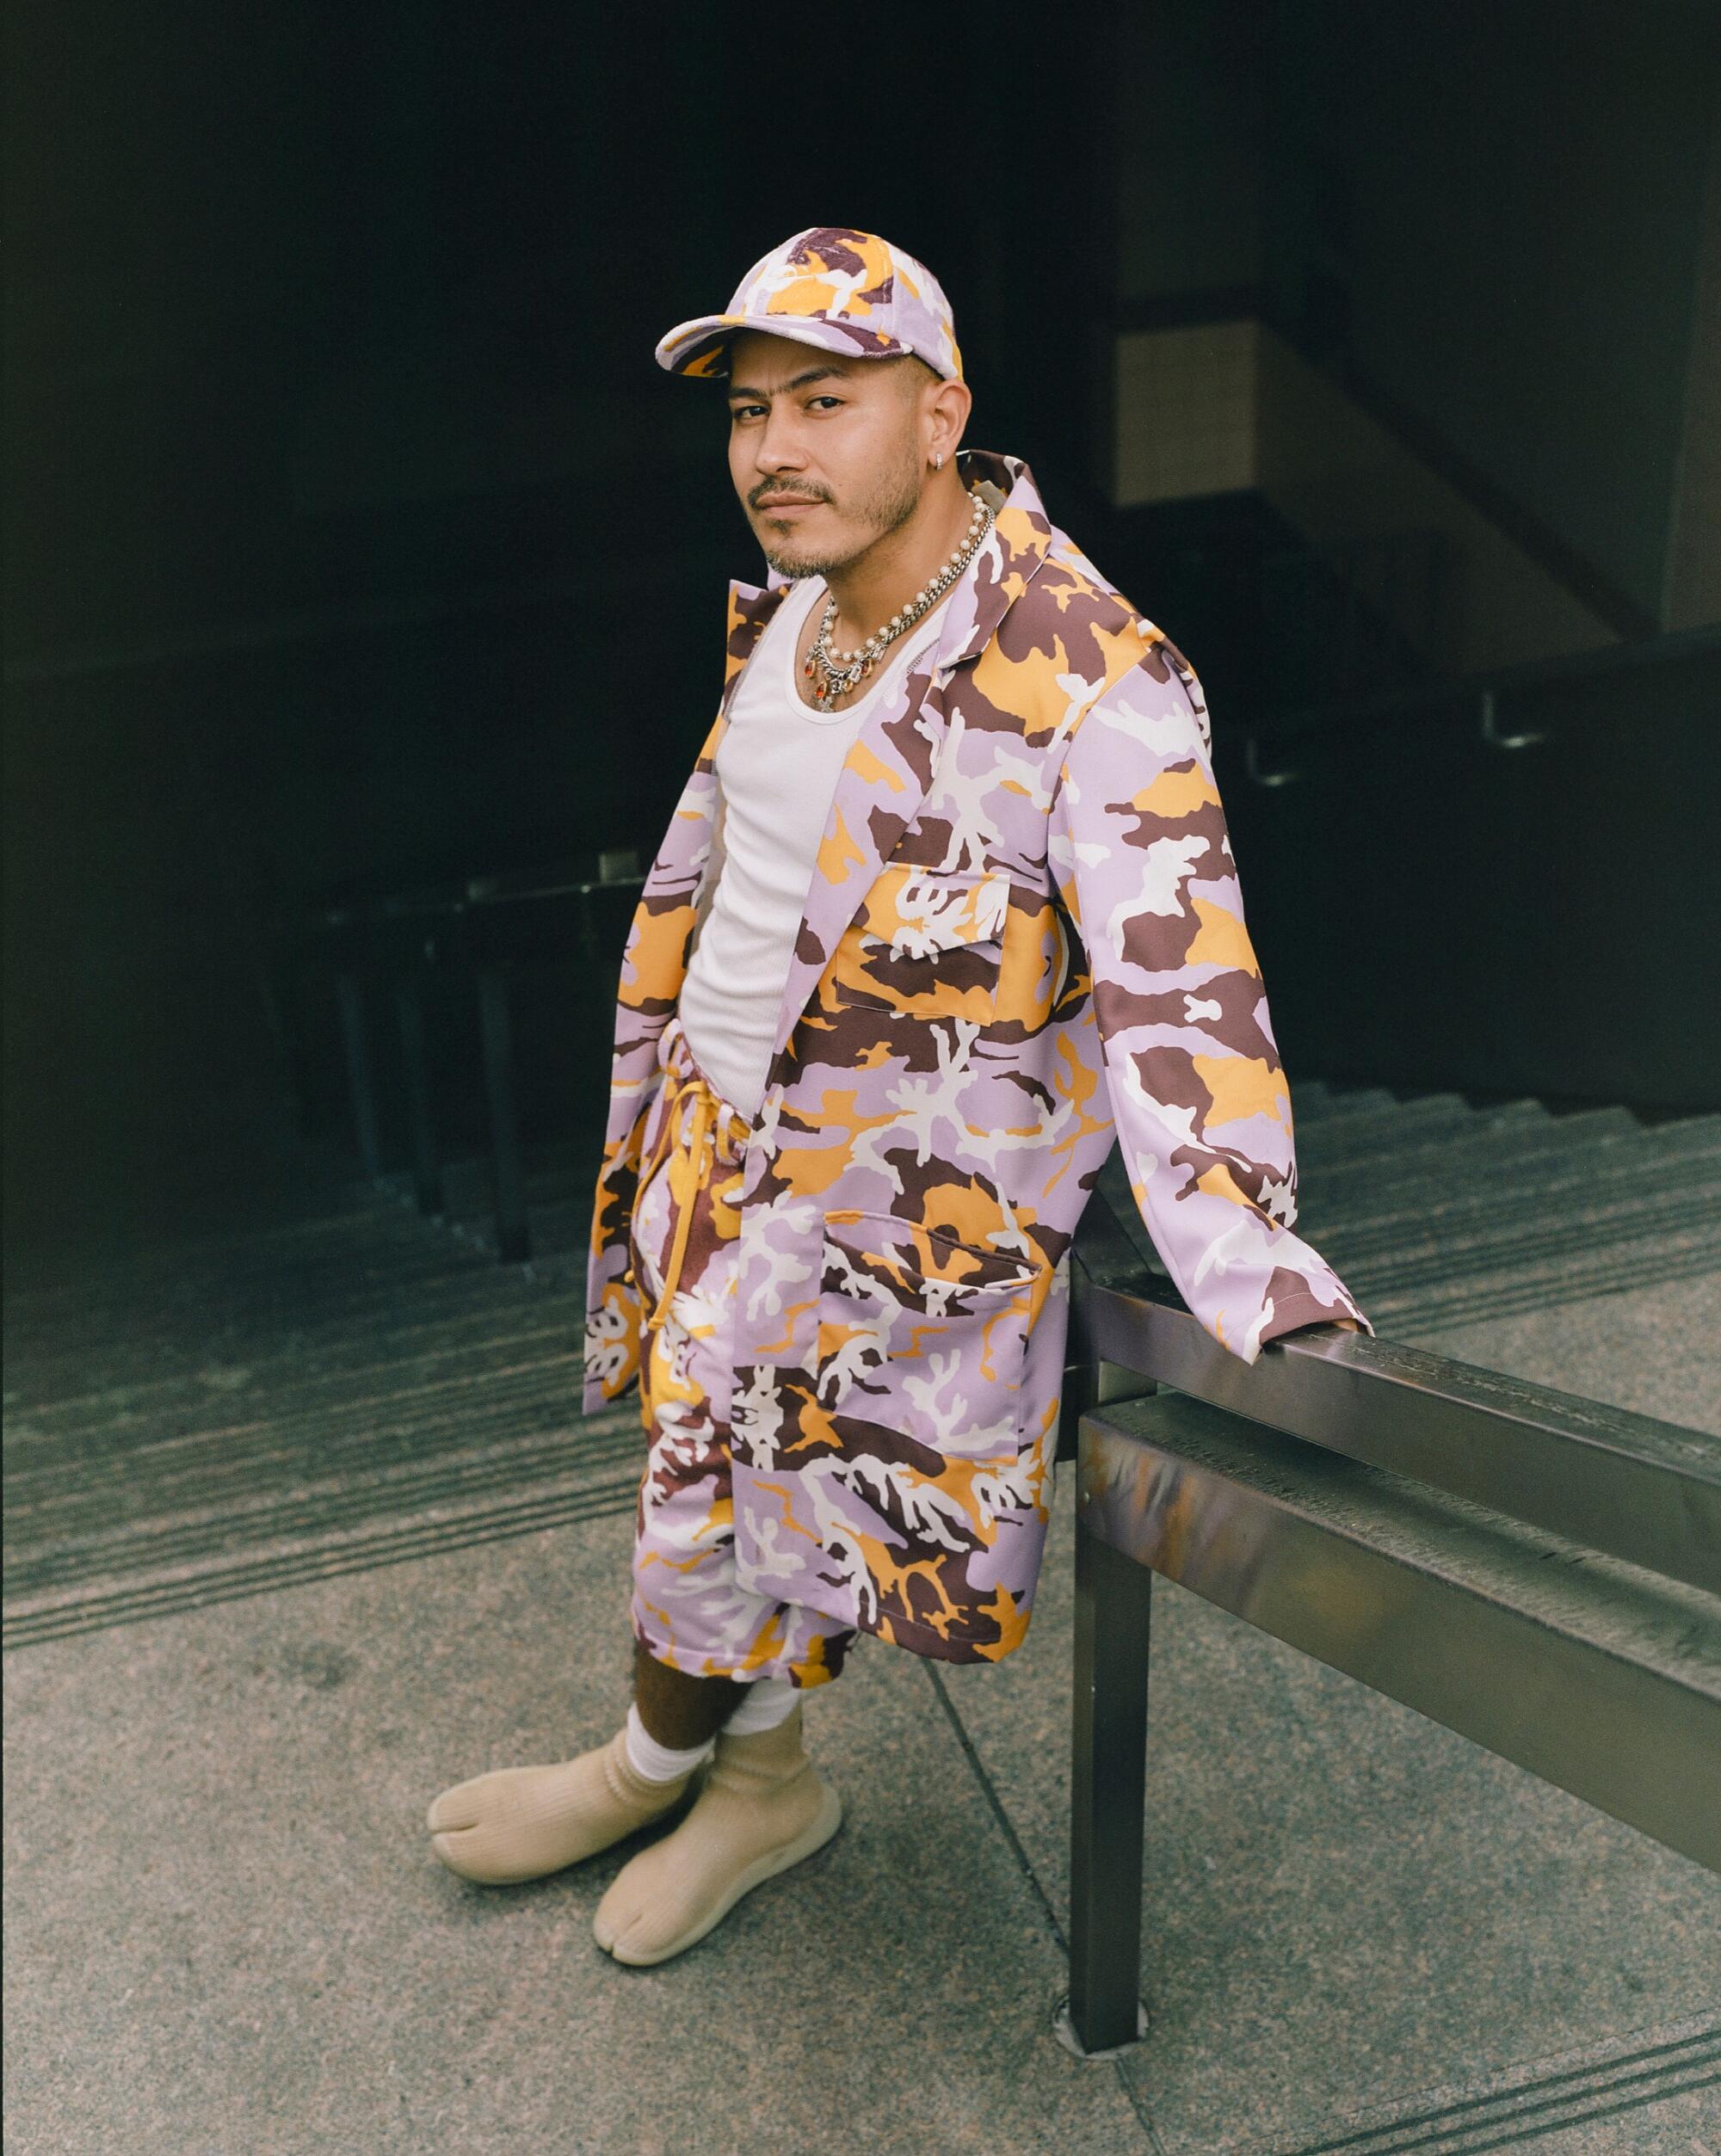 Rio Uribe, founder of Gypsy Sport poses in a camouflage outfit.